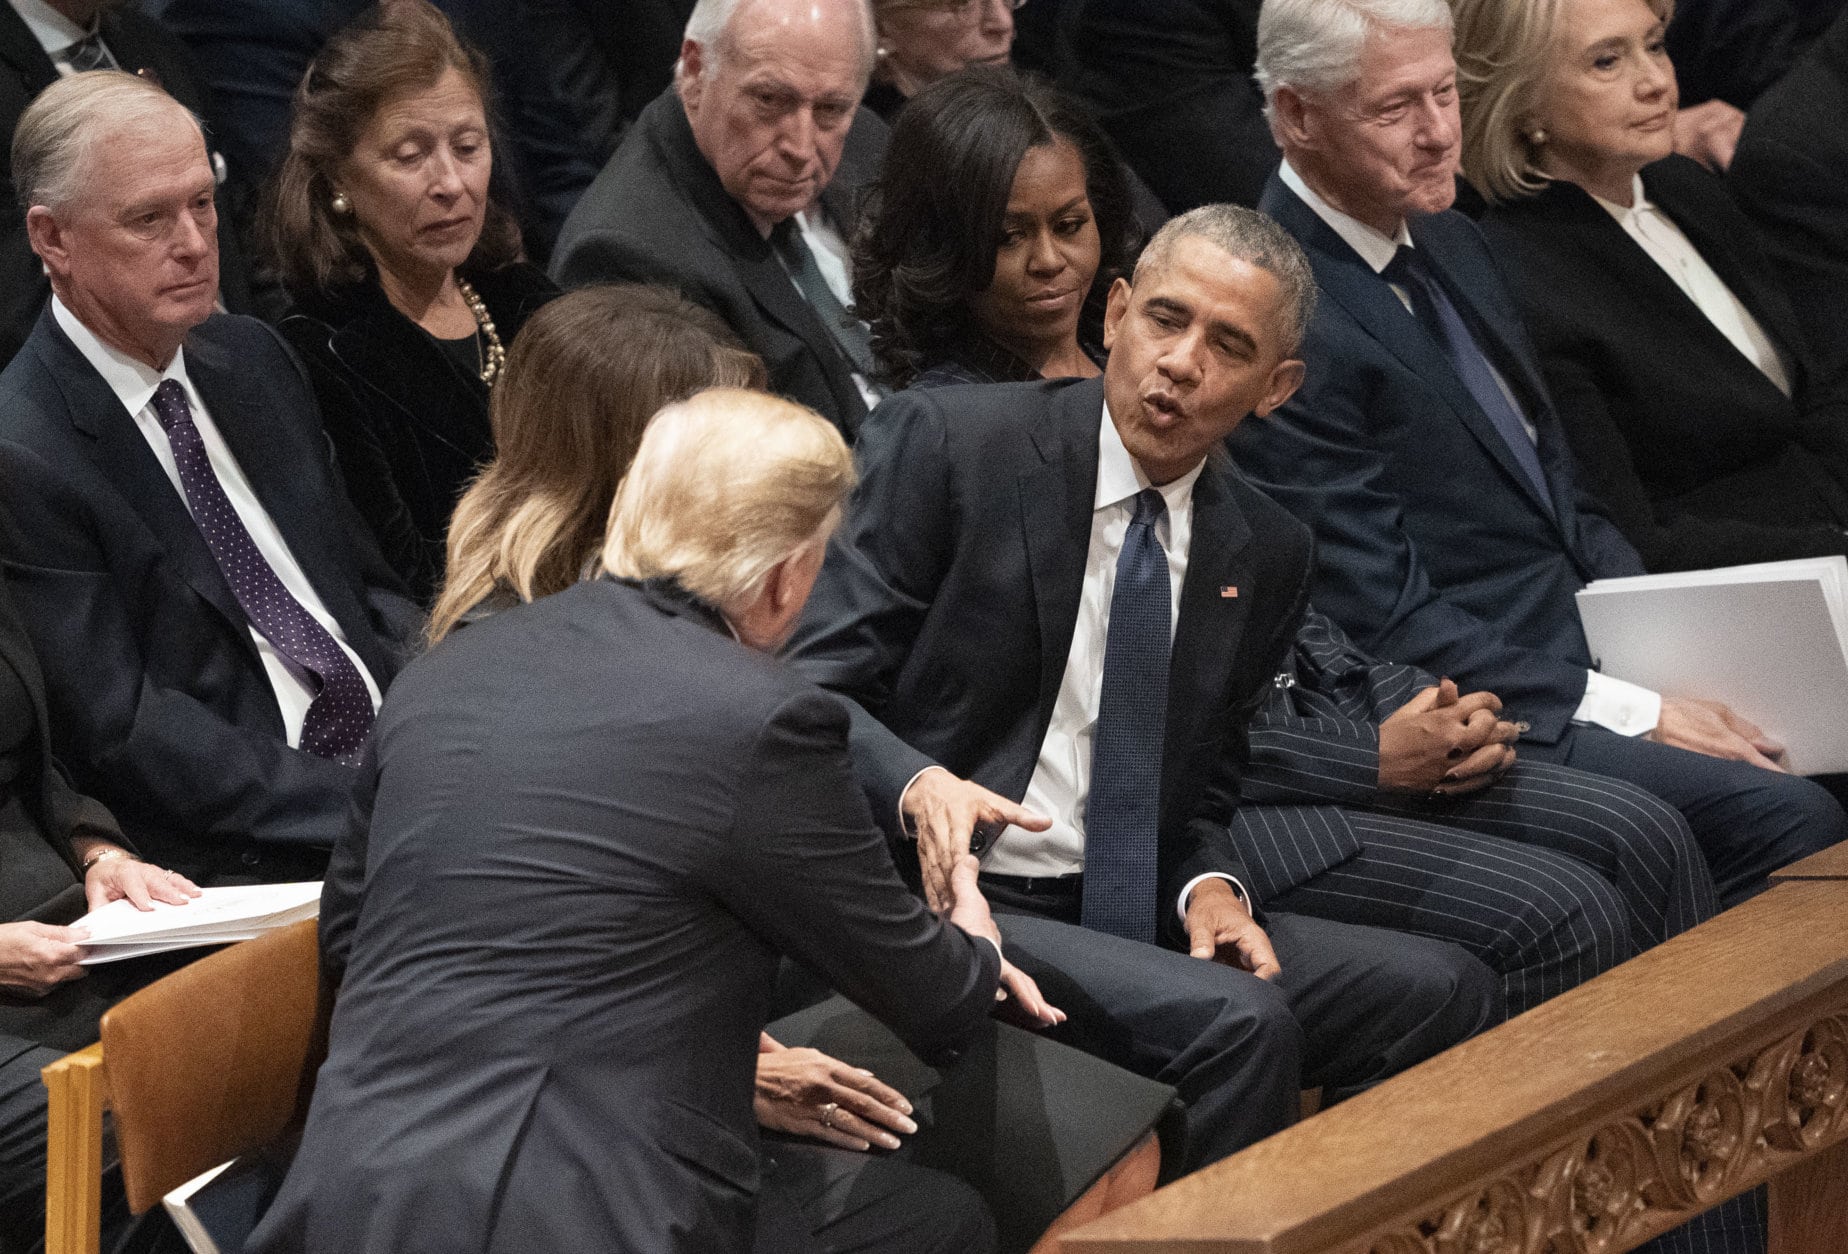 President Donald Trump shakes hands with former President Barack Obama during a State Funeral service for former President George H.W. Bush at Washington National Cathedral in Washington, Wednesday, Dec. 5, 2018. (AP Photo/Carolyn Kaster)